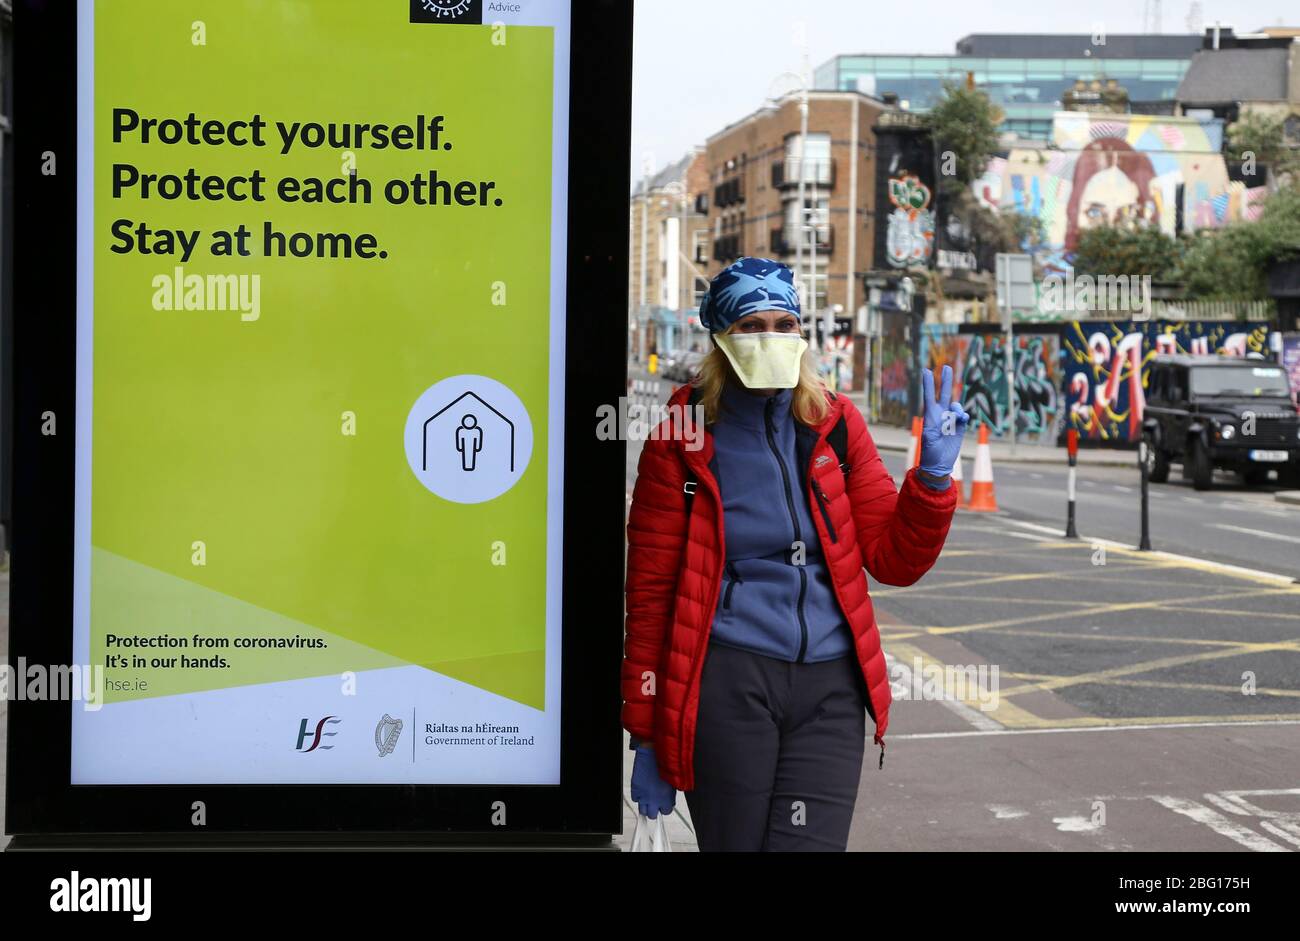 Dublin, Ireland - April 19, 2020: a woman wearing a face mask gives a peace sign while waiting for a bus in the city centre. Stock Photo